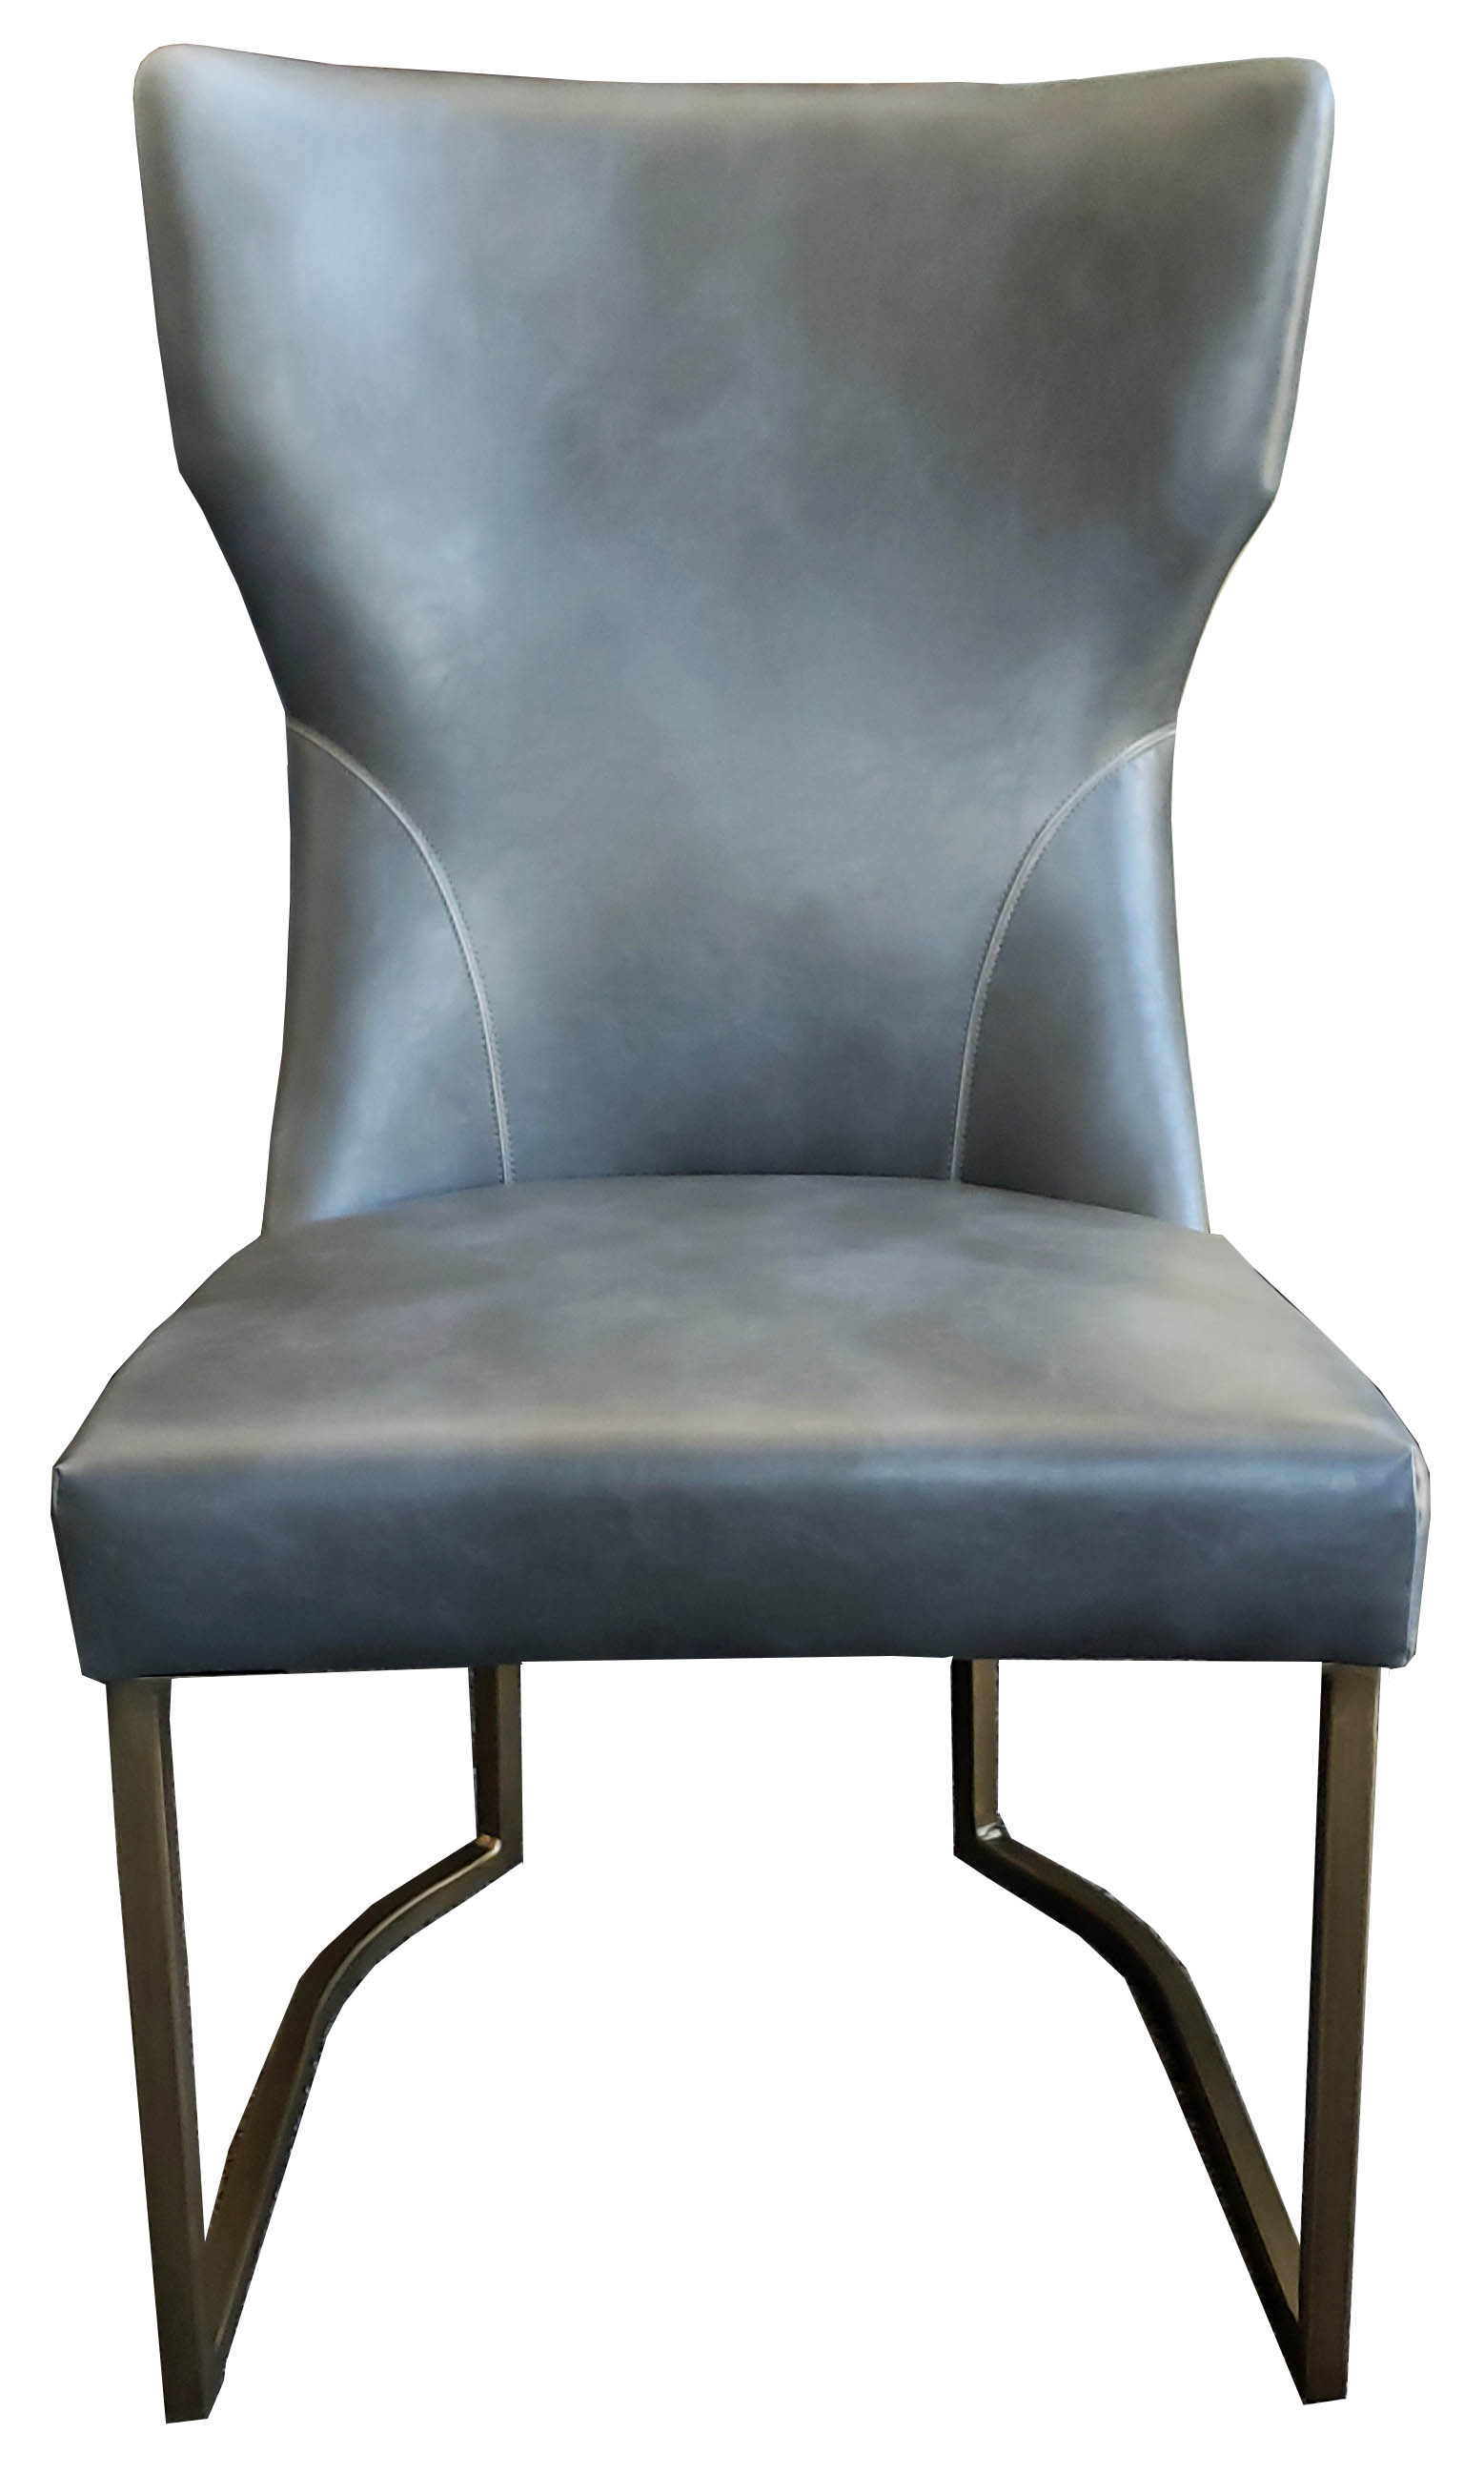 Grey Leather Dining Chair W Fabric Back, Leather And Fabric Chairs